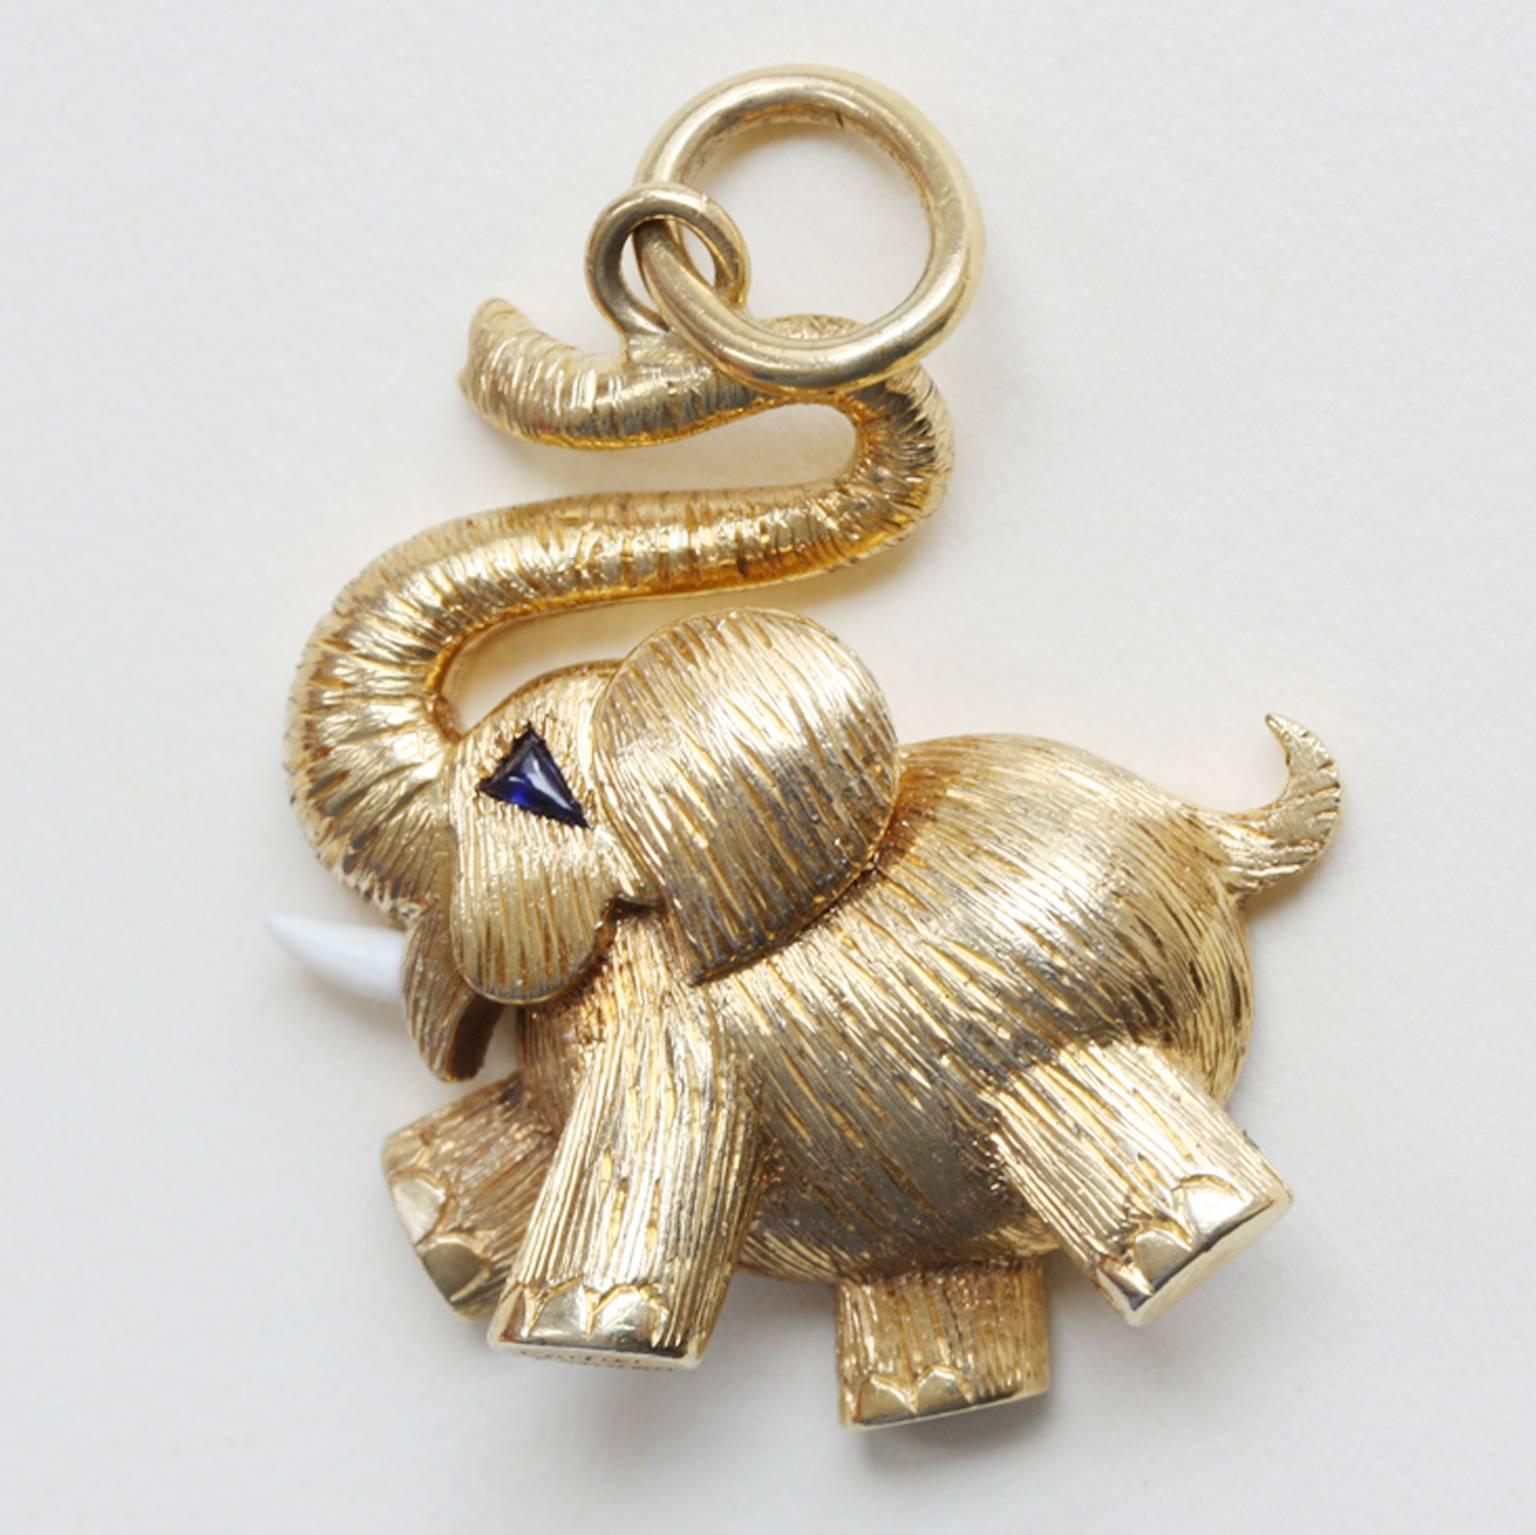 An English 18 carat gold happy elephant luck charm. His trunk is up and his eye is made with a triangle cut sapphire, his tusk is made of bone, finely engraved. The elephant is signed and numbered: Cartier, London, 1975.

weight: 13.2